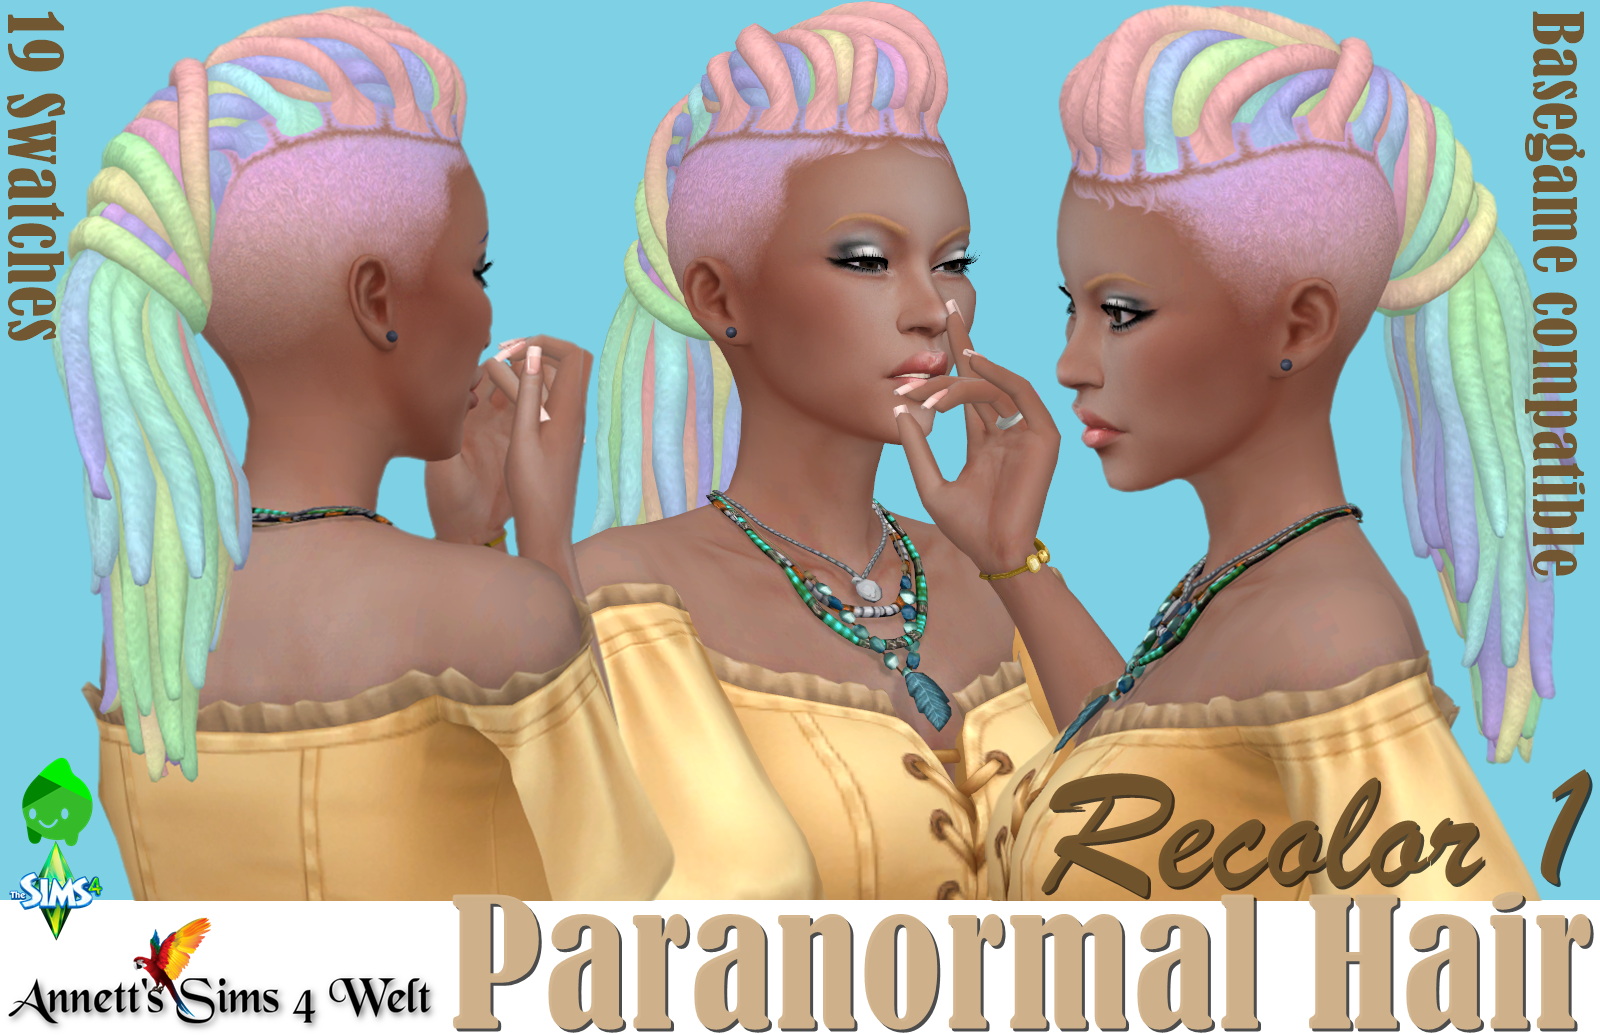 Sims 2 Blue Hair Recolors - wide 2